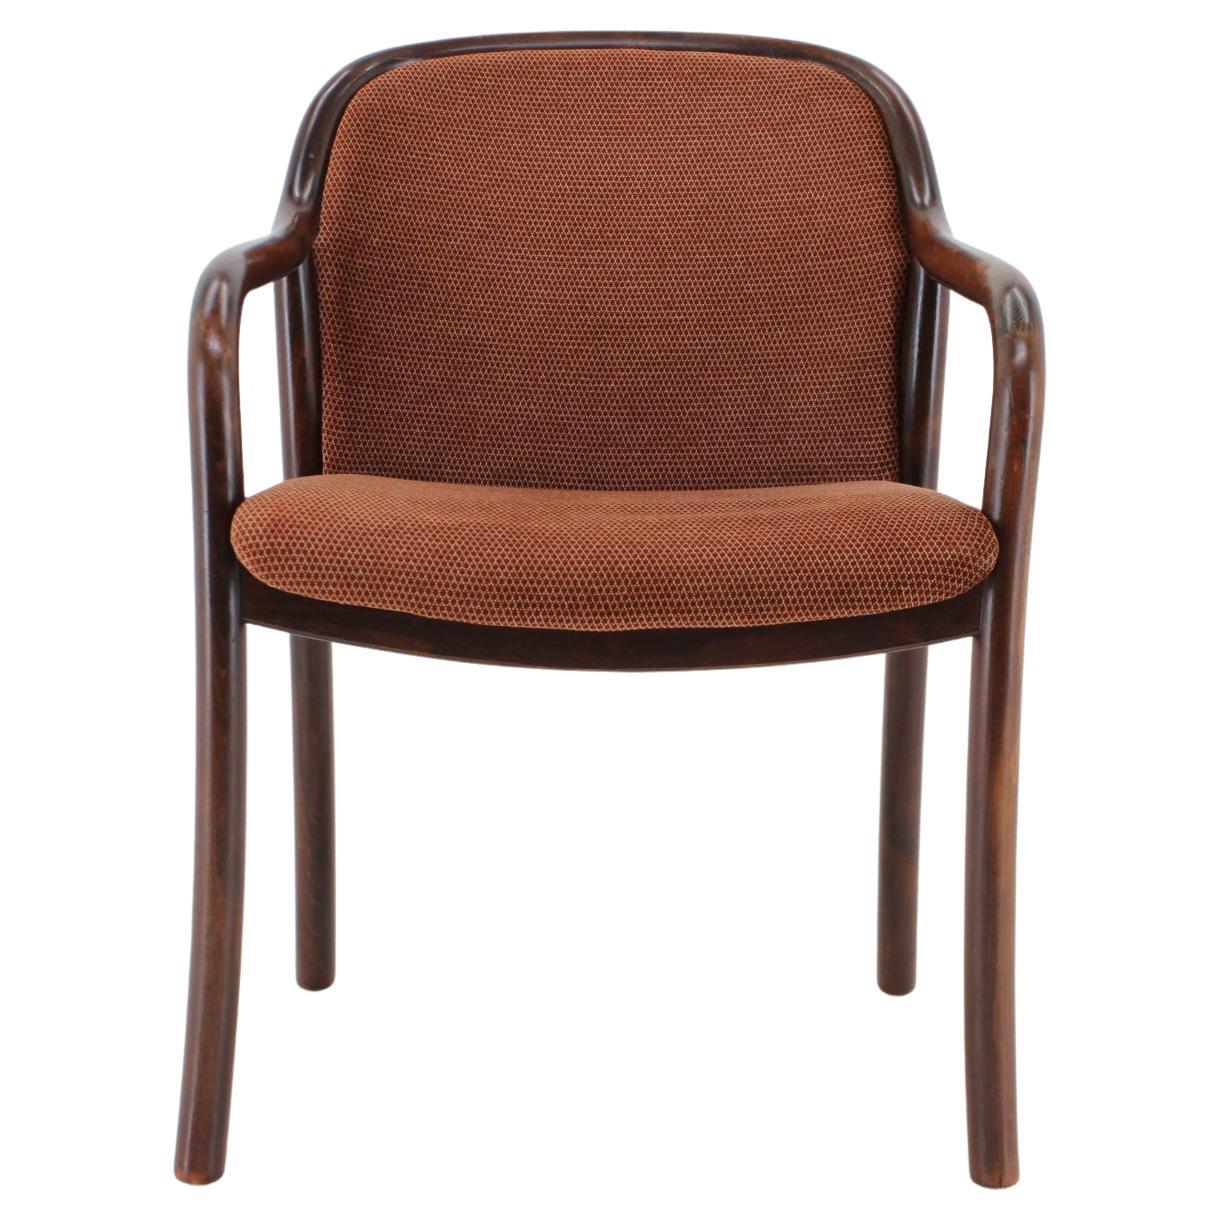 1970s Bentwood Armchair, Germany For Sale